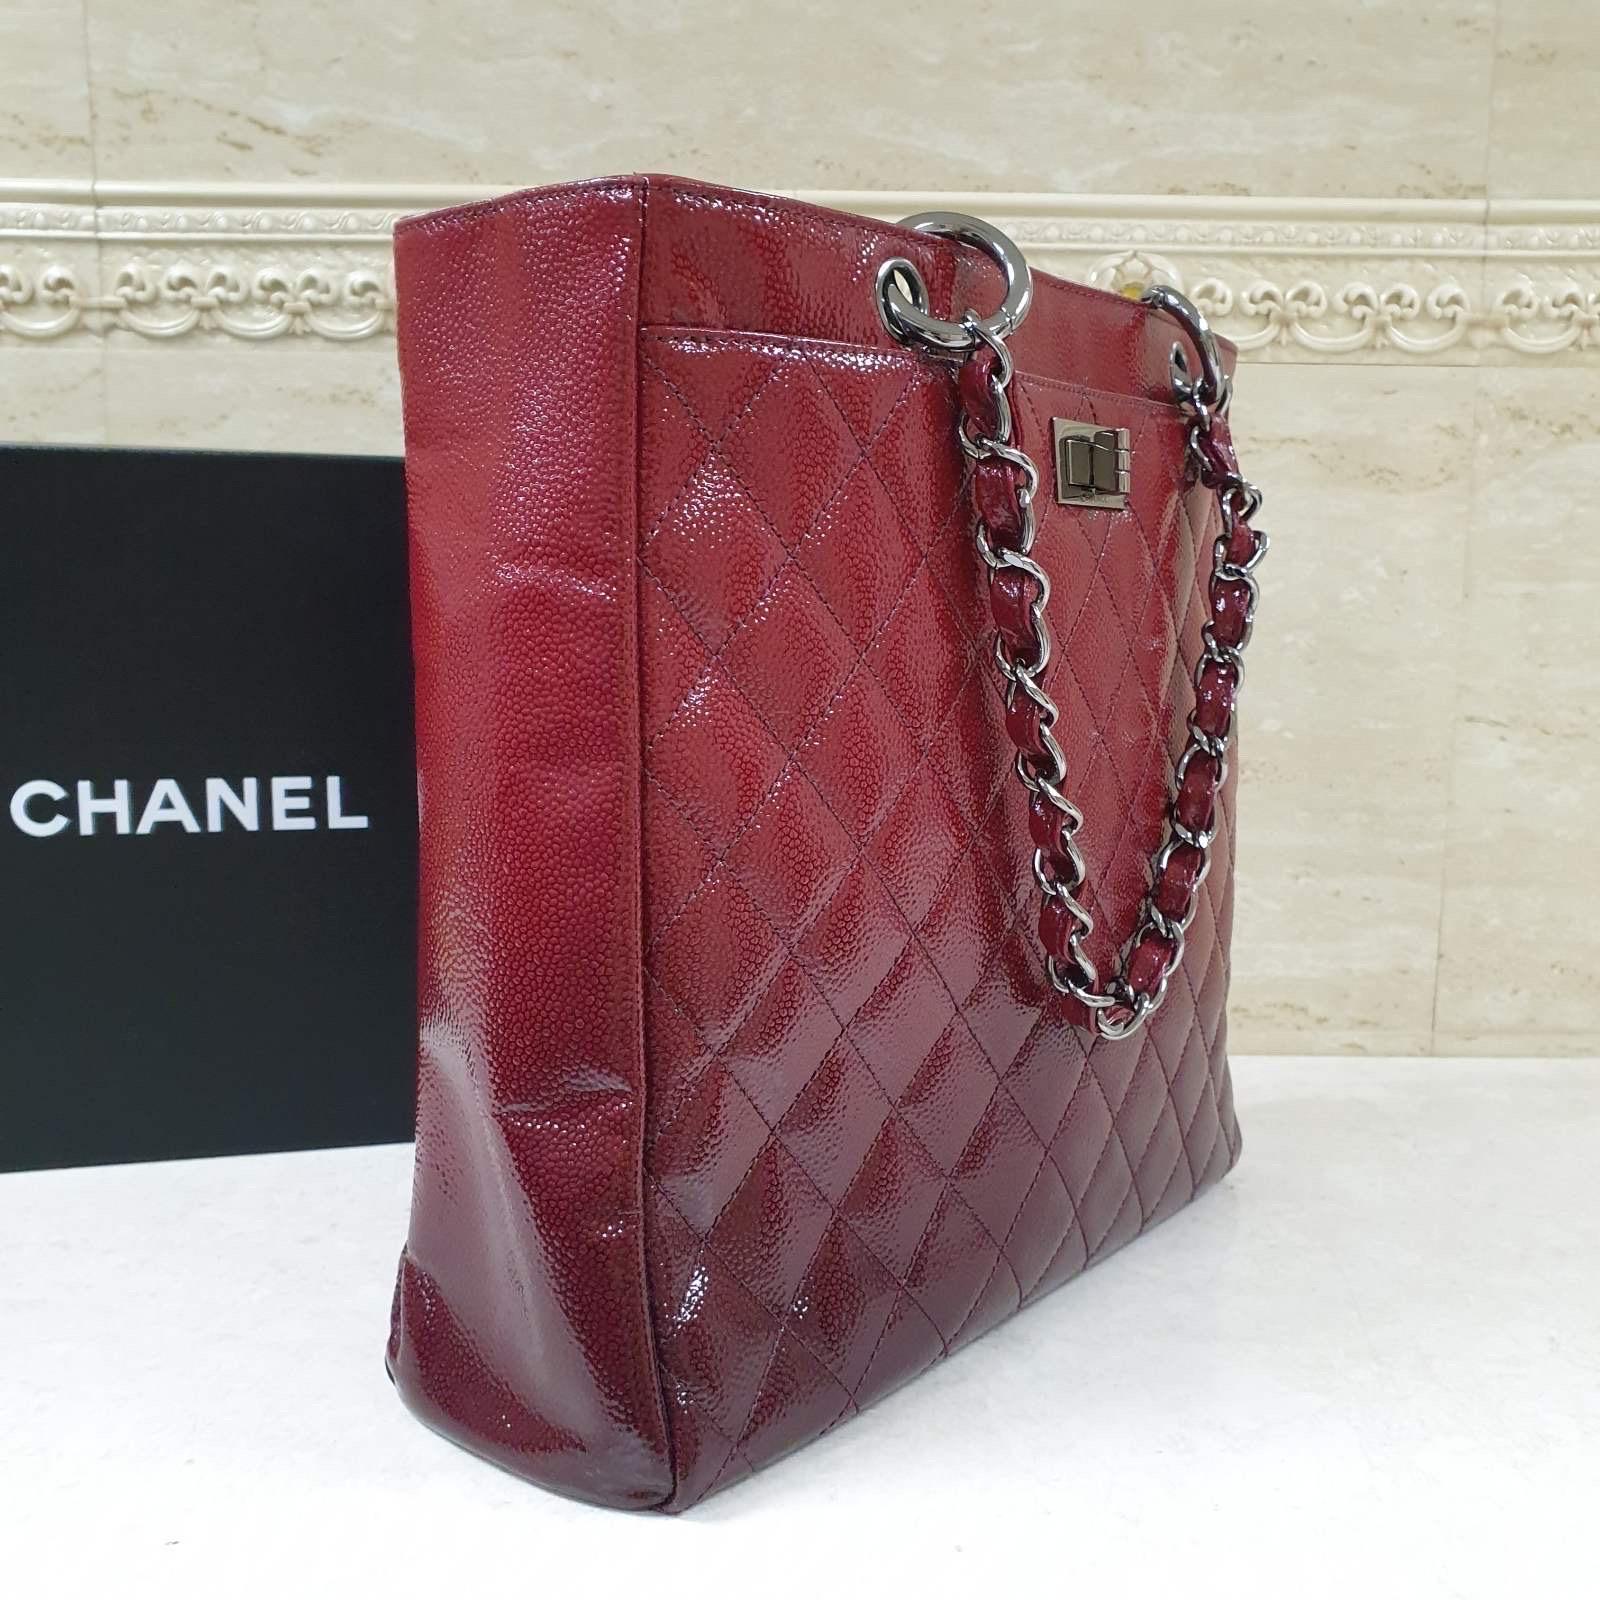 Chanel Burgundy Ombré Quilted Patent Grained Leather 2.55 Reissue Bag 6